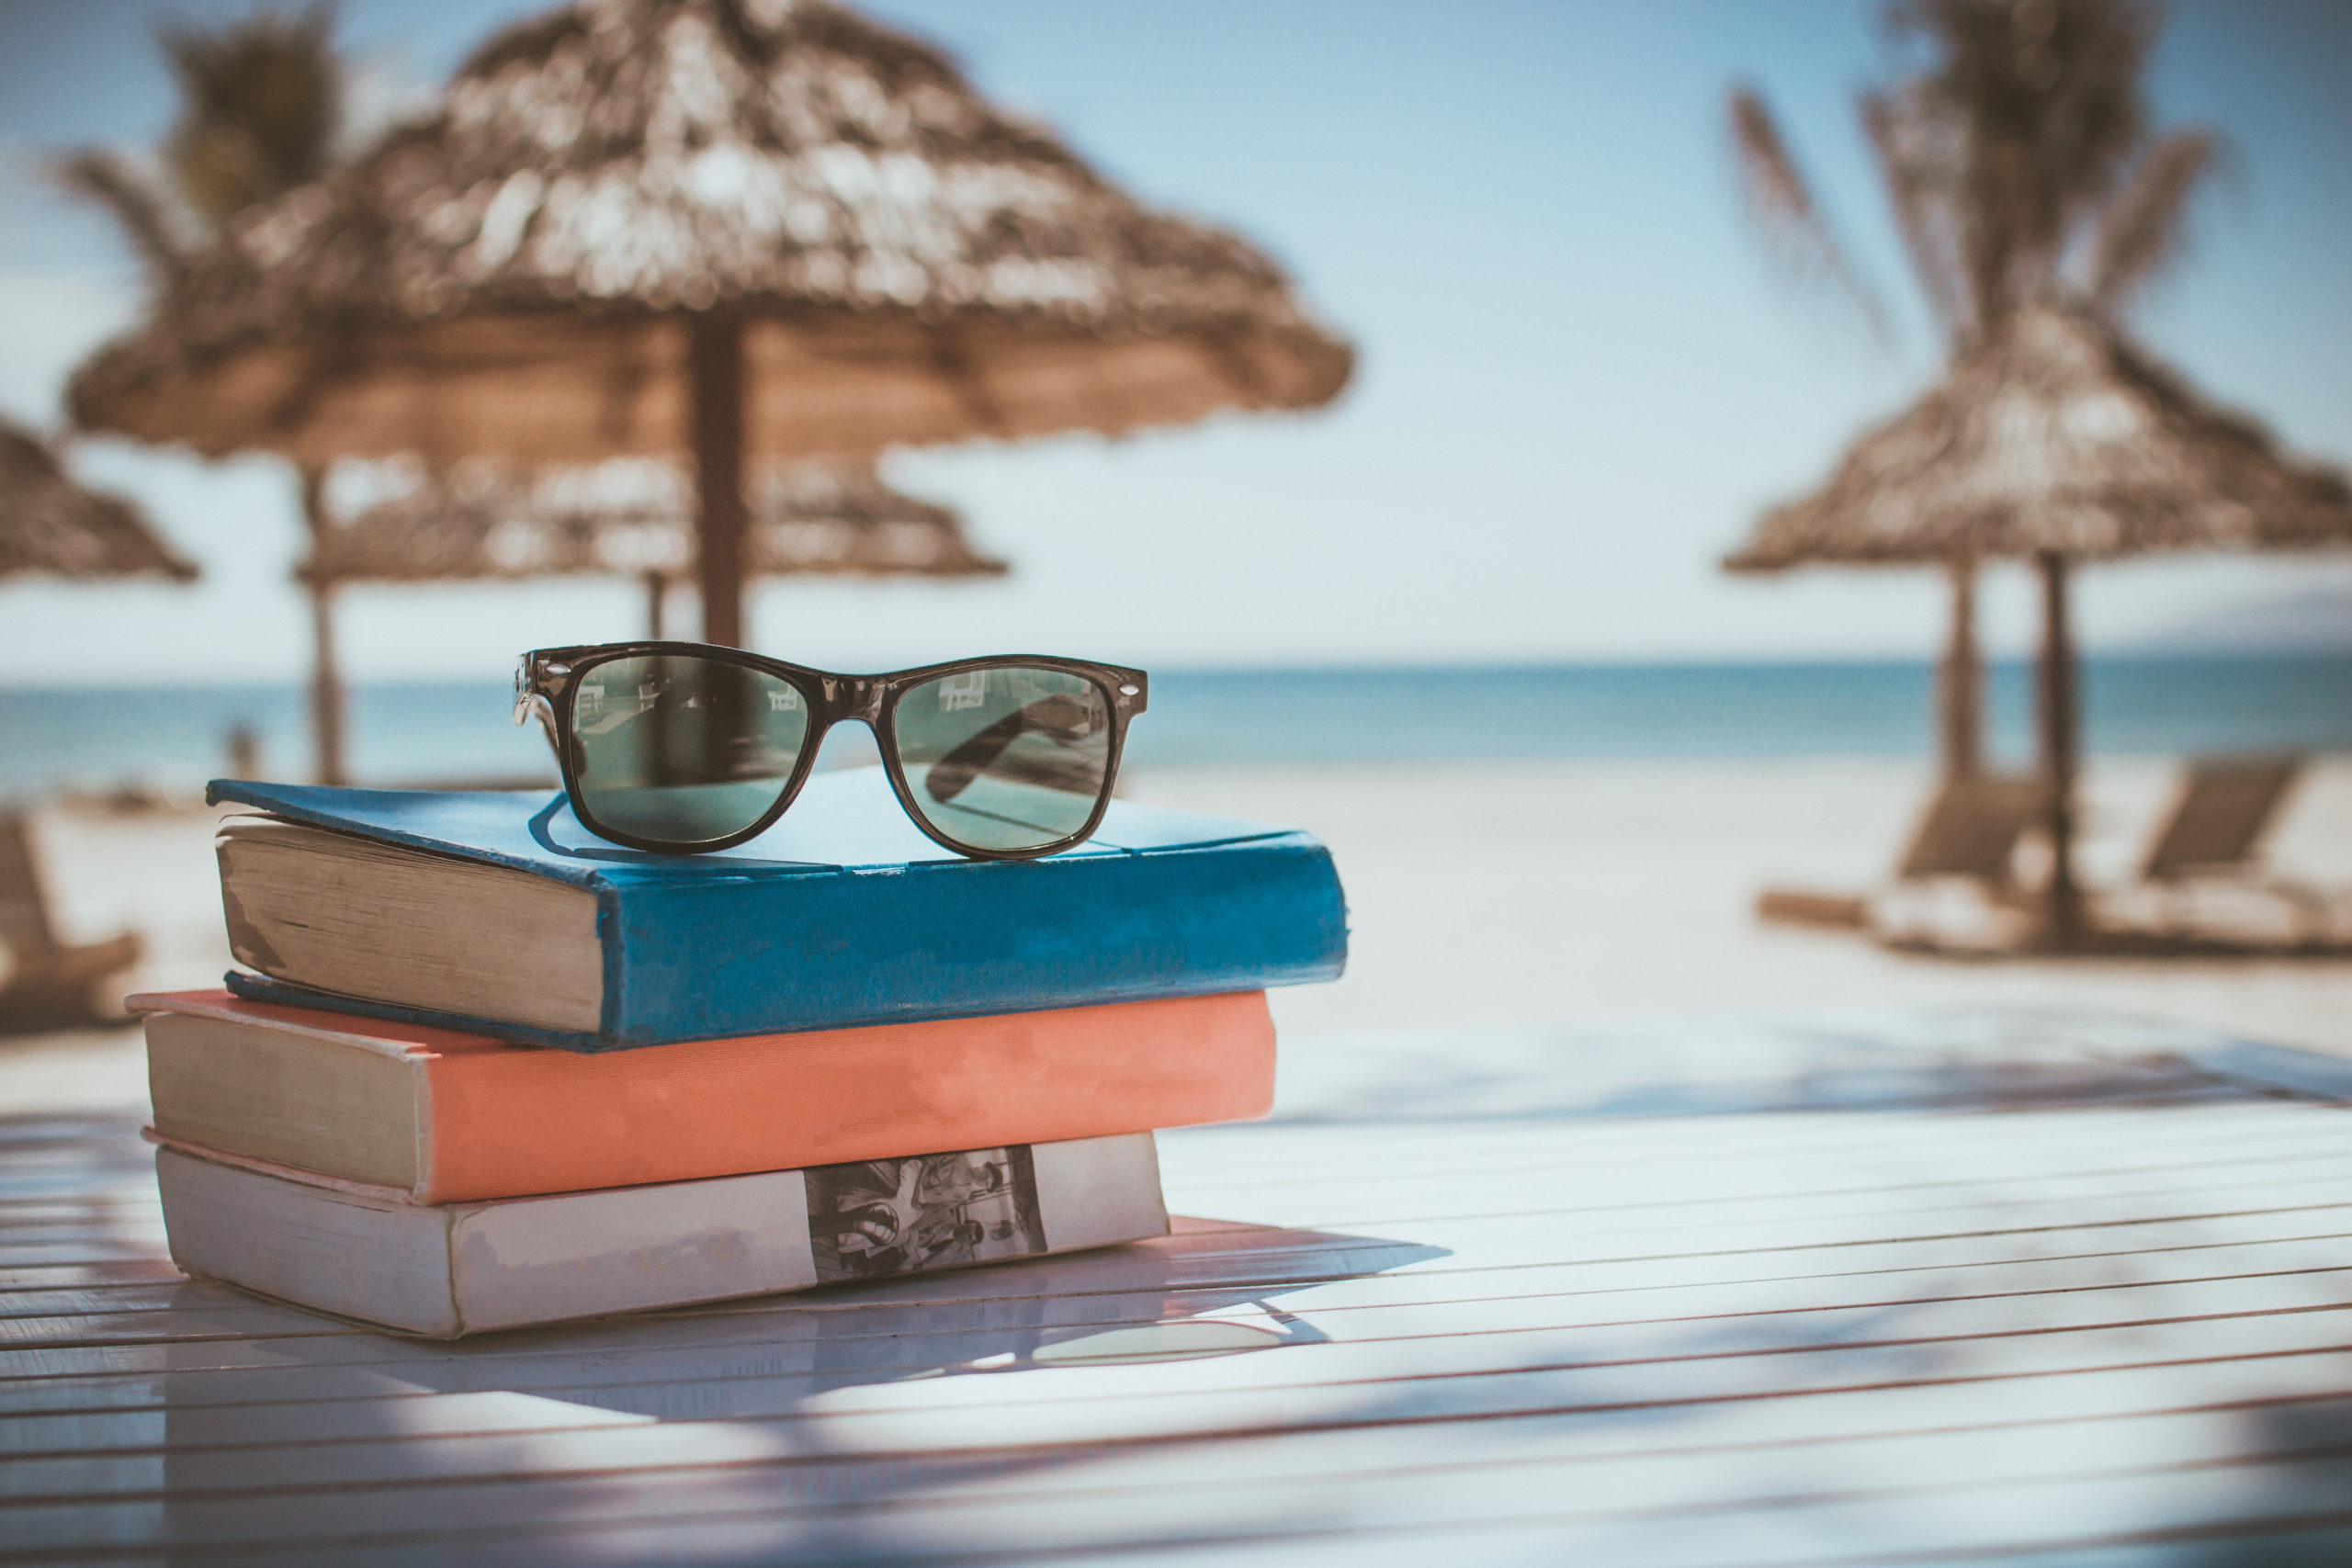 Summer Beach Scene with Books and Sunglasses and a Tiki Hut in the Background